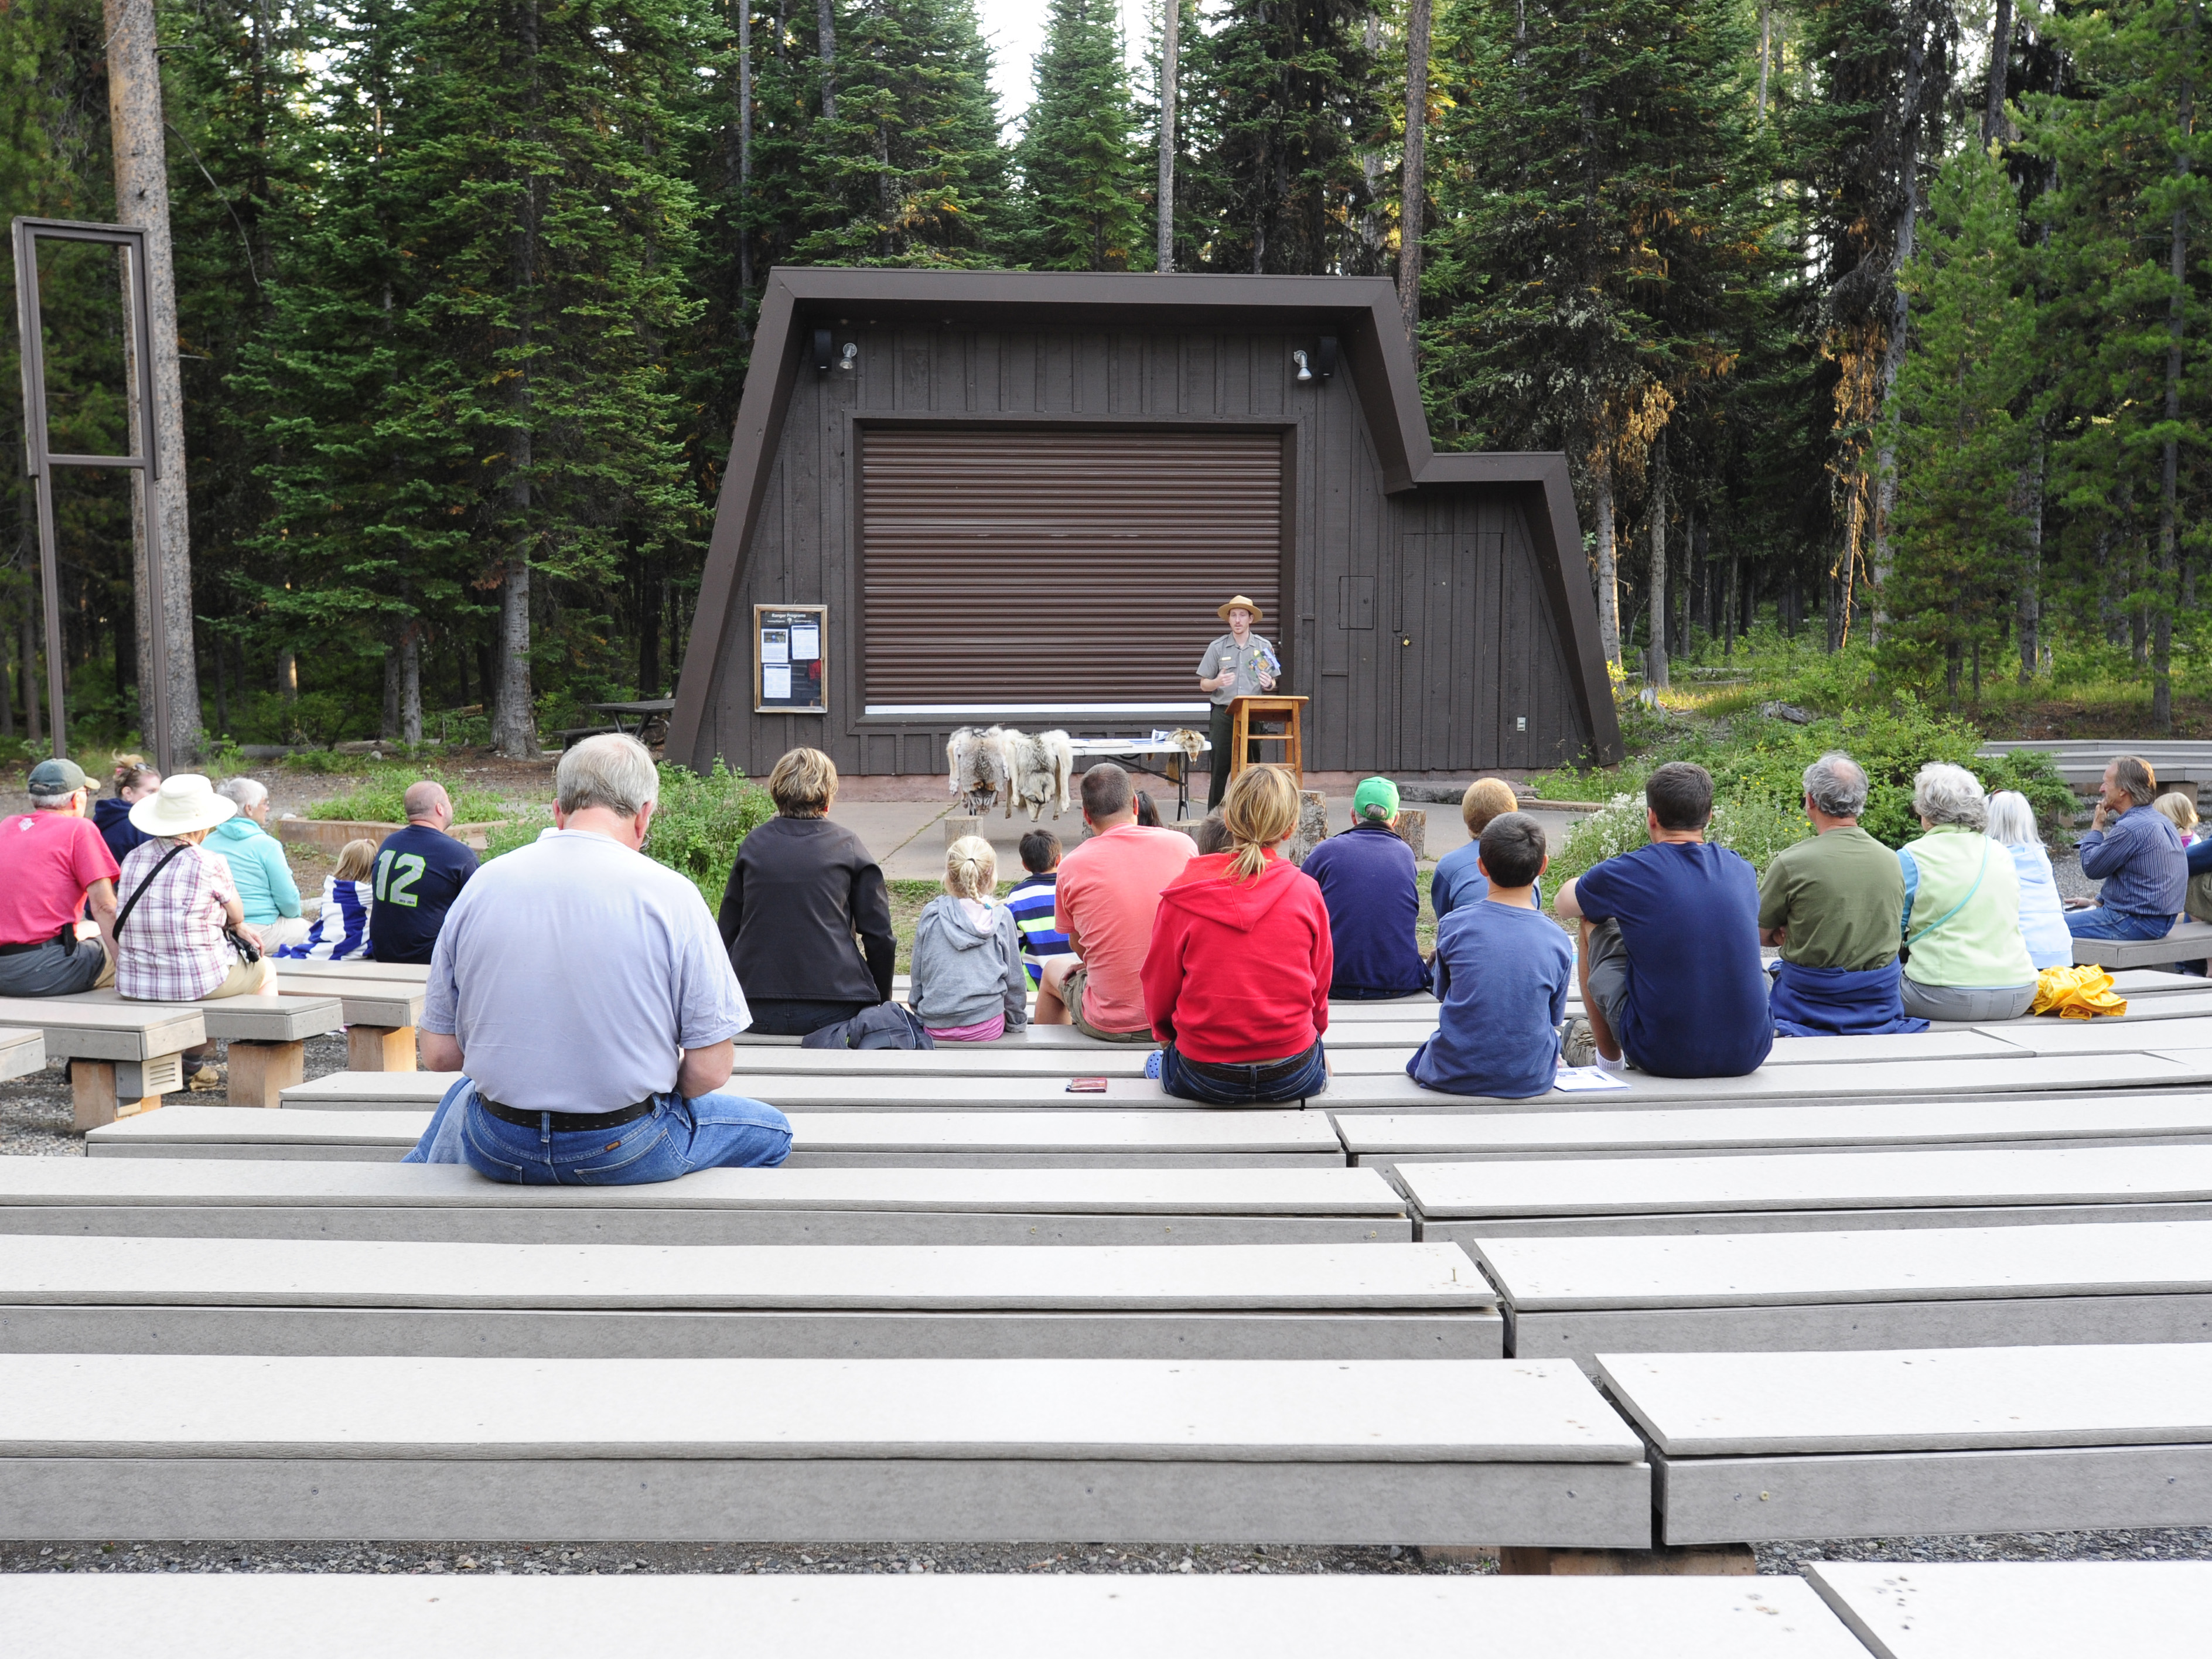 outside amphitheater with visitors sitting on benches and a ranger on stage making a presentation